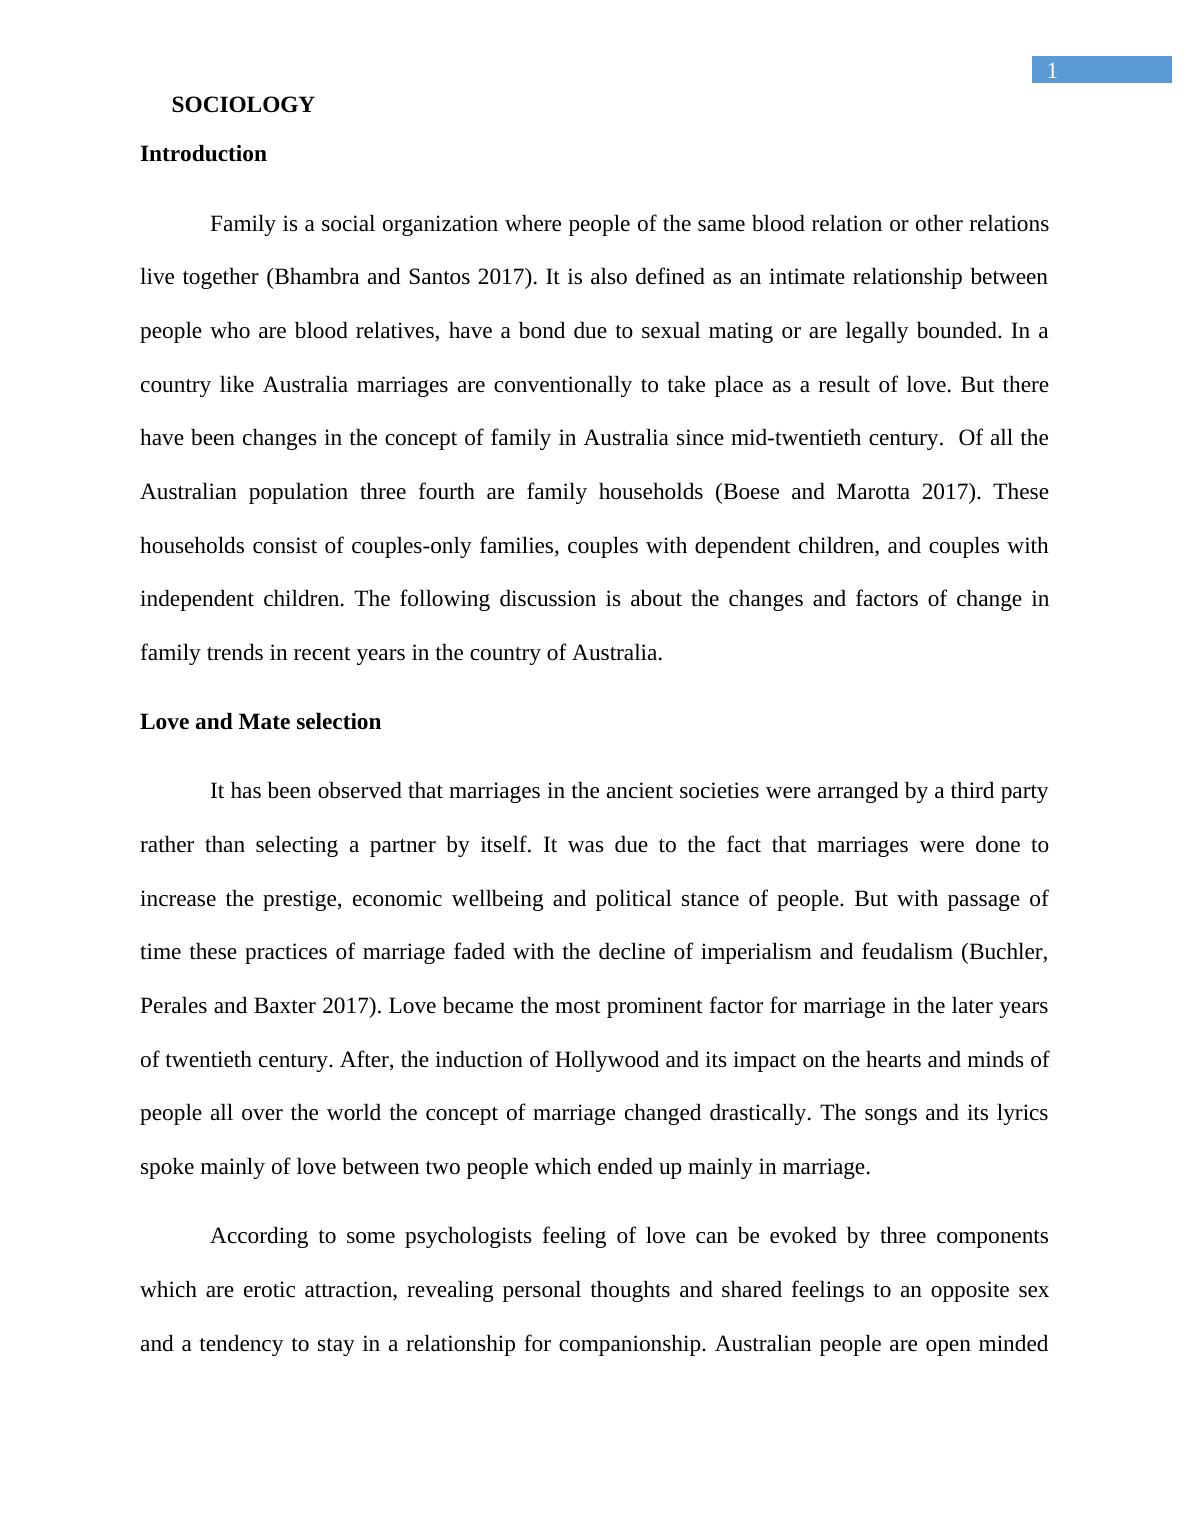 Sociology Assignment - DOC_2